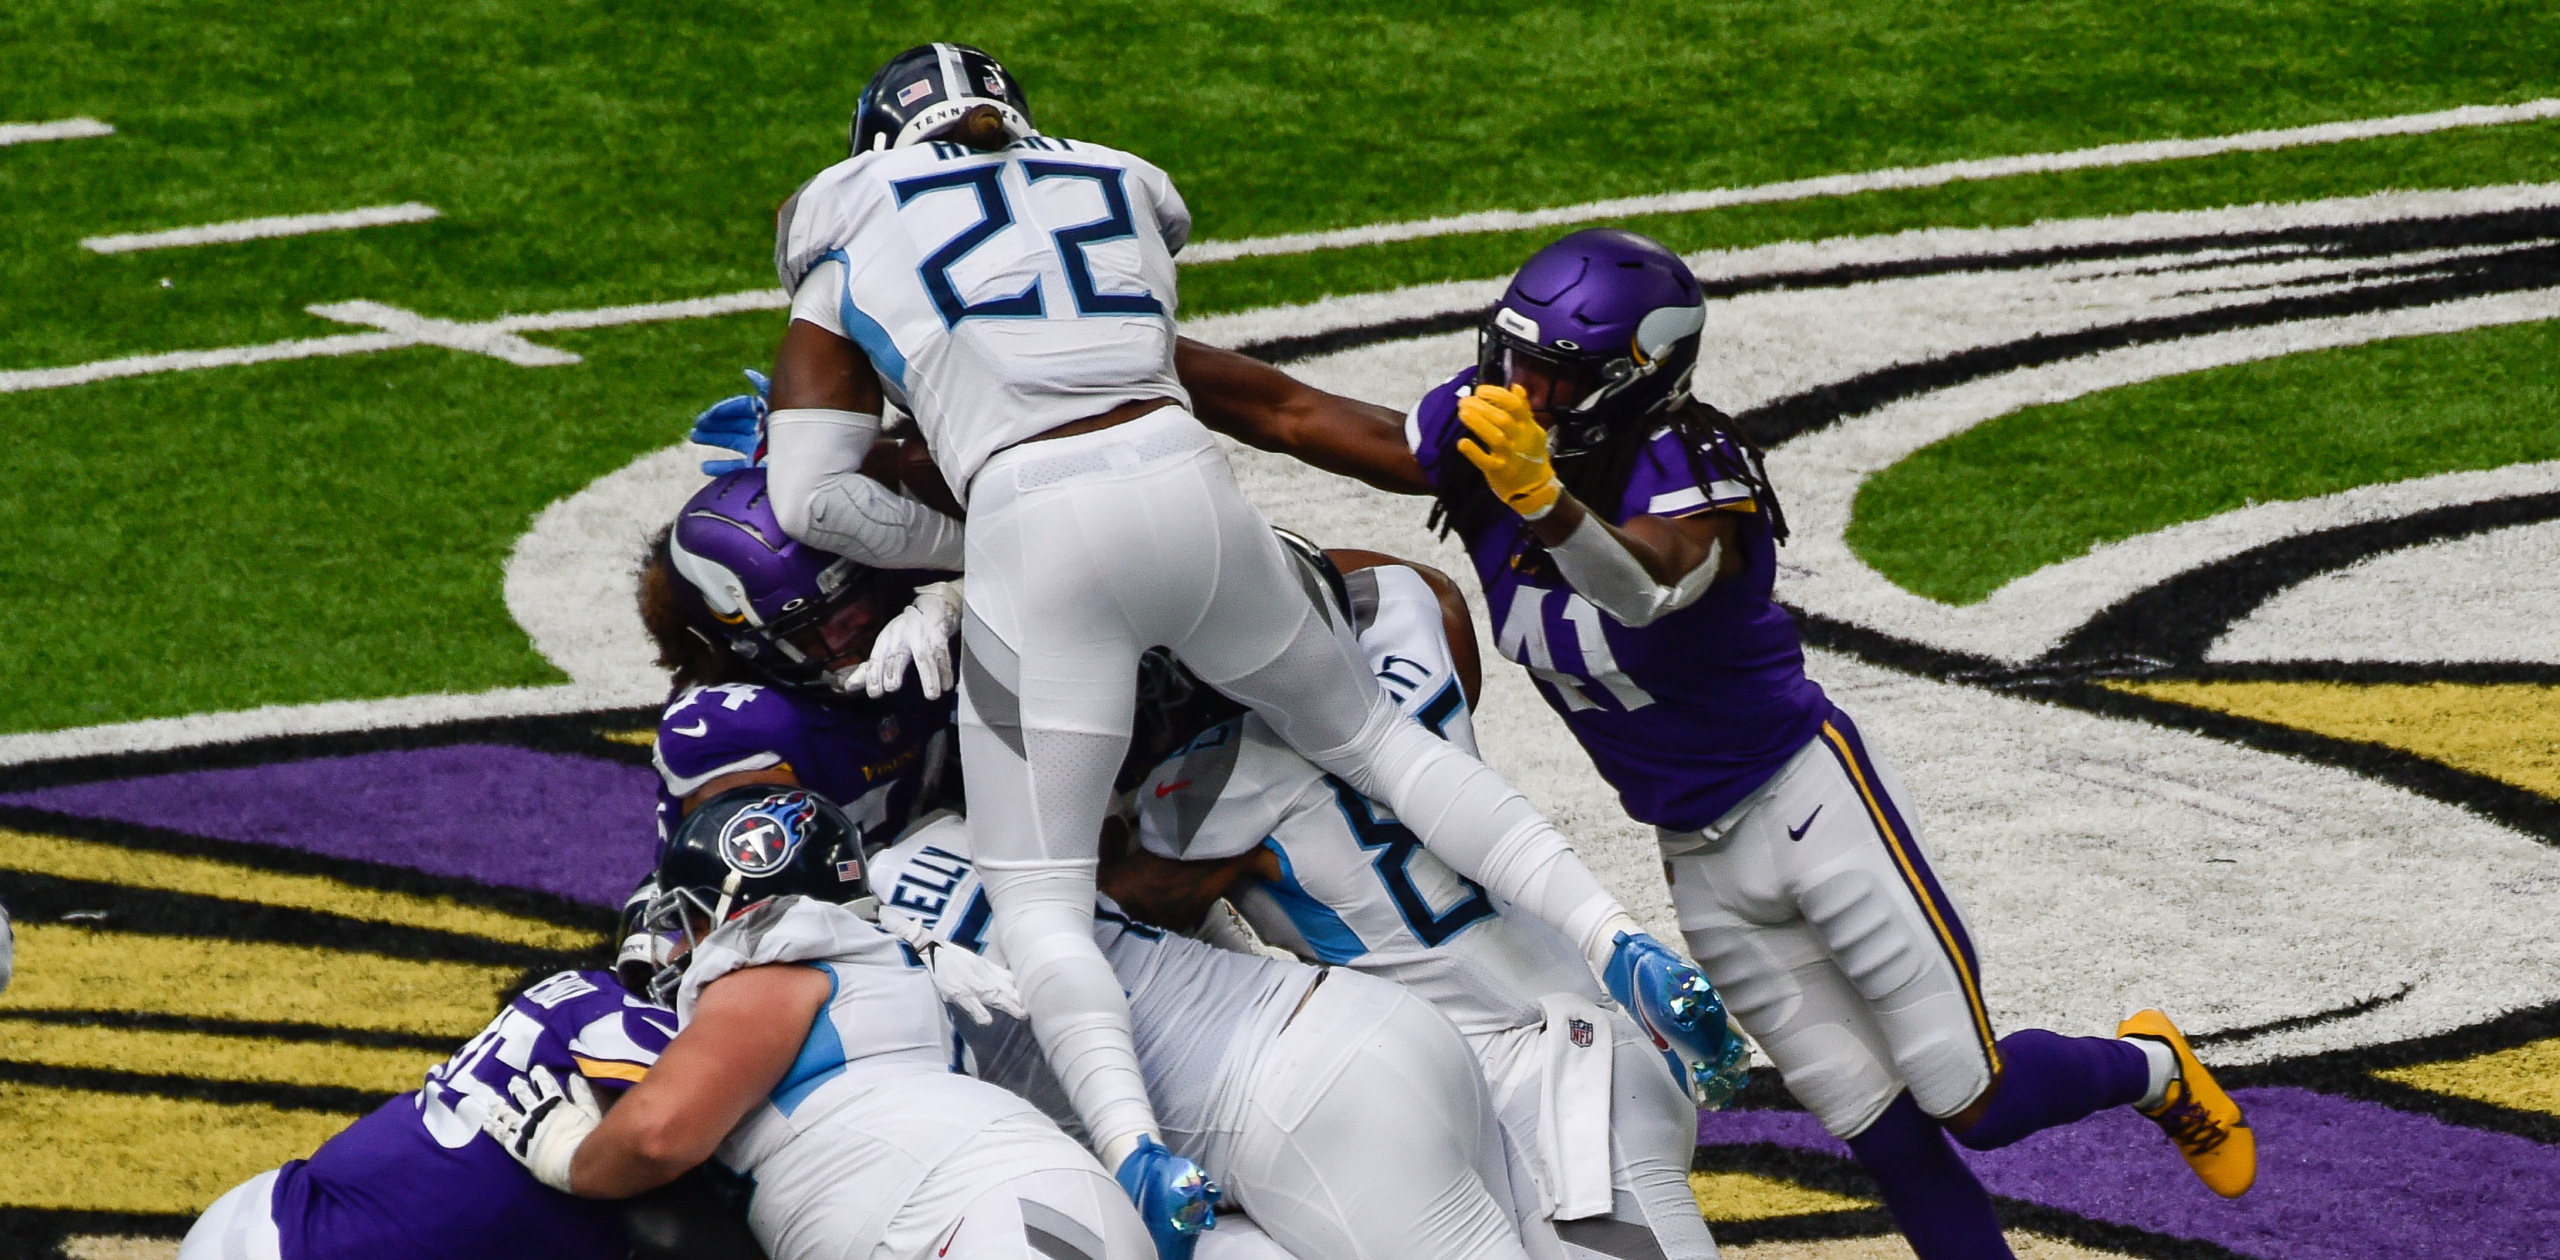 Titans, Vikings Suspend In-Person Activities After Titans’ Positive COVID-19 Tests